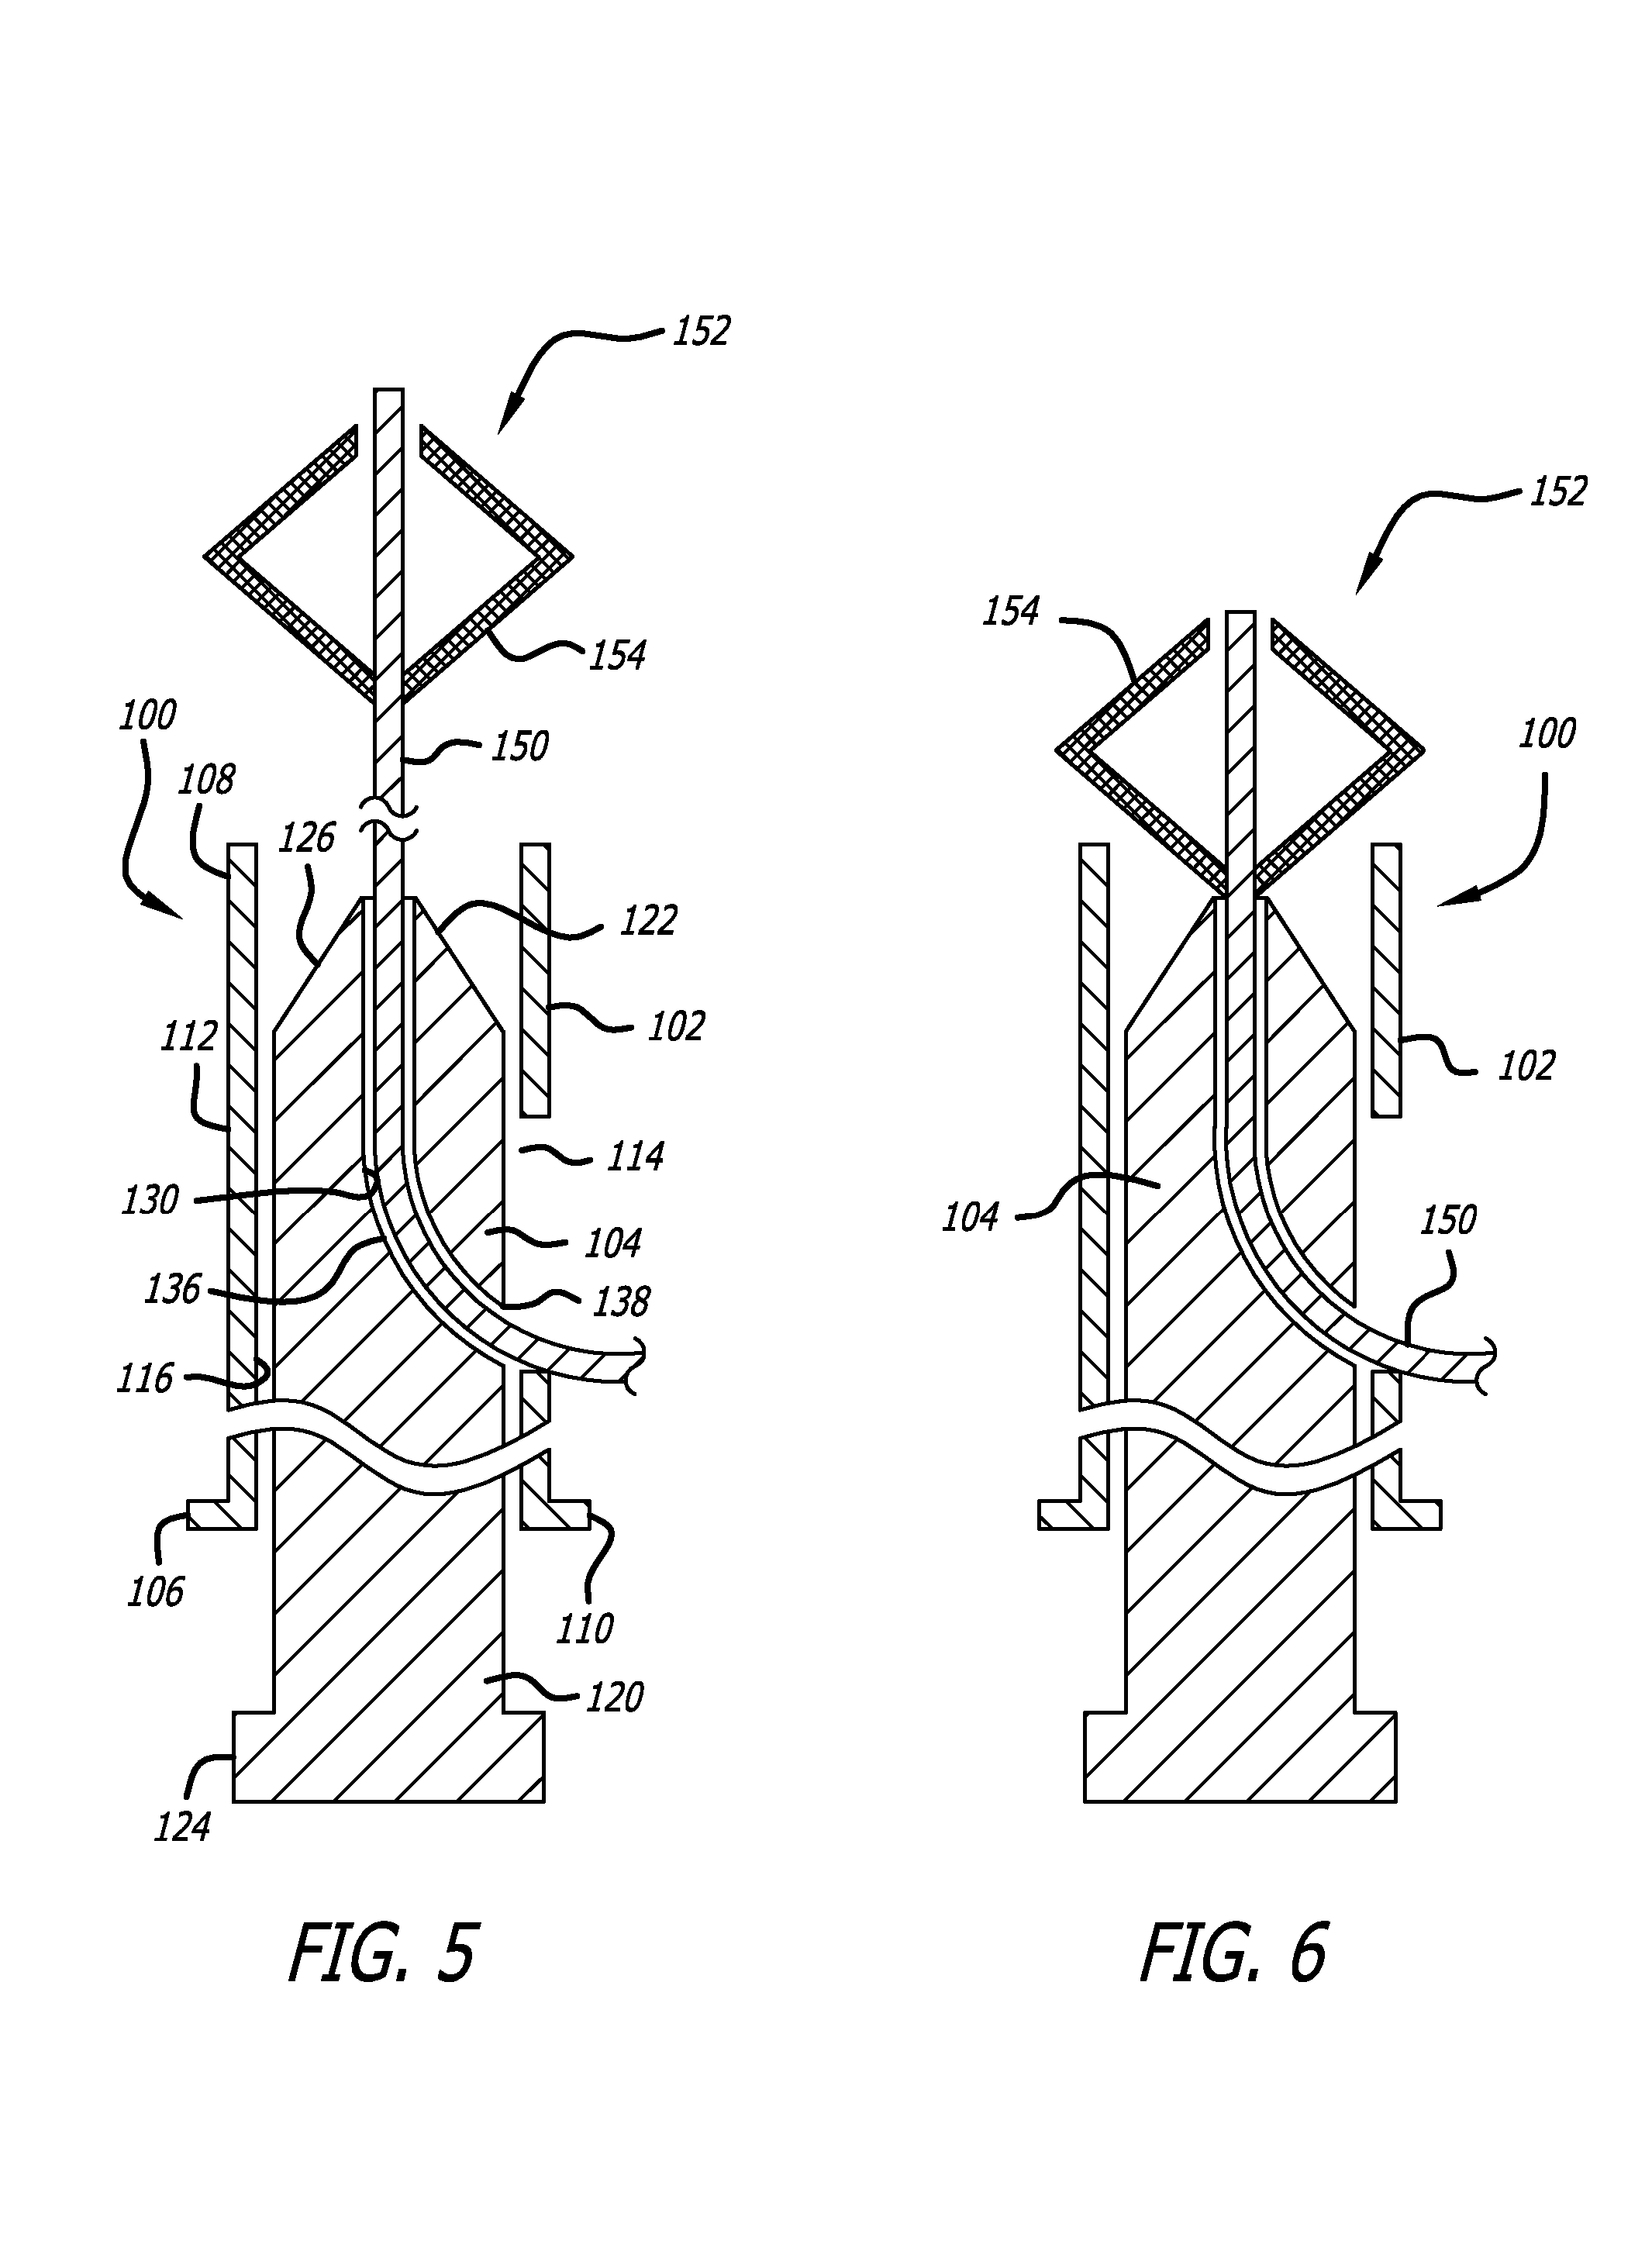 Recovery catheter apparatus and method